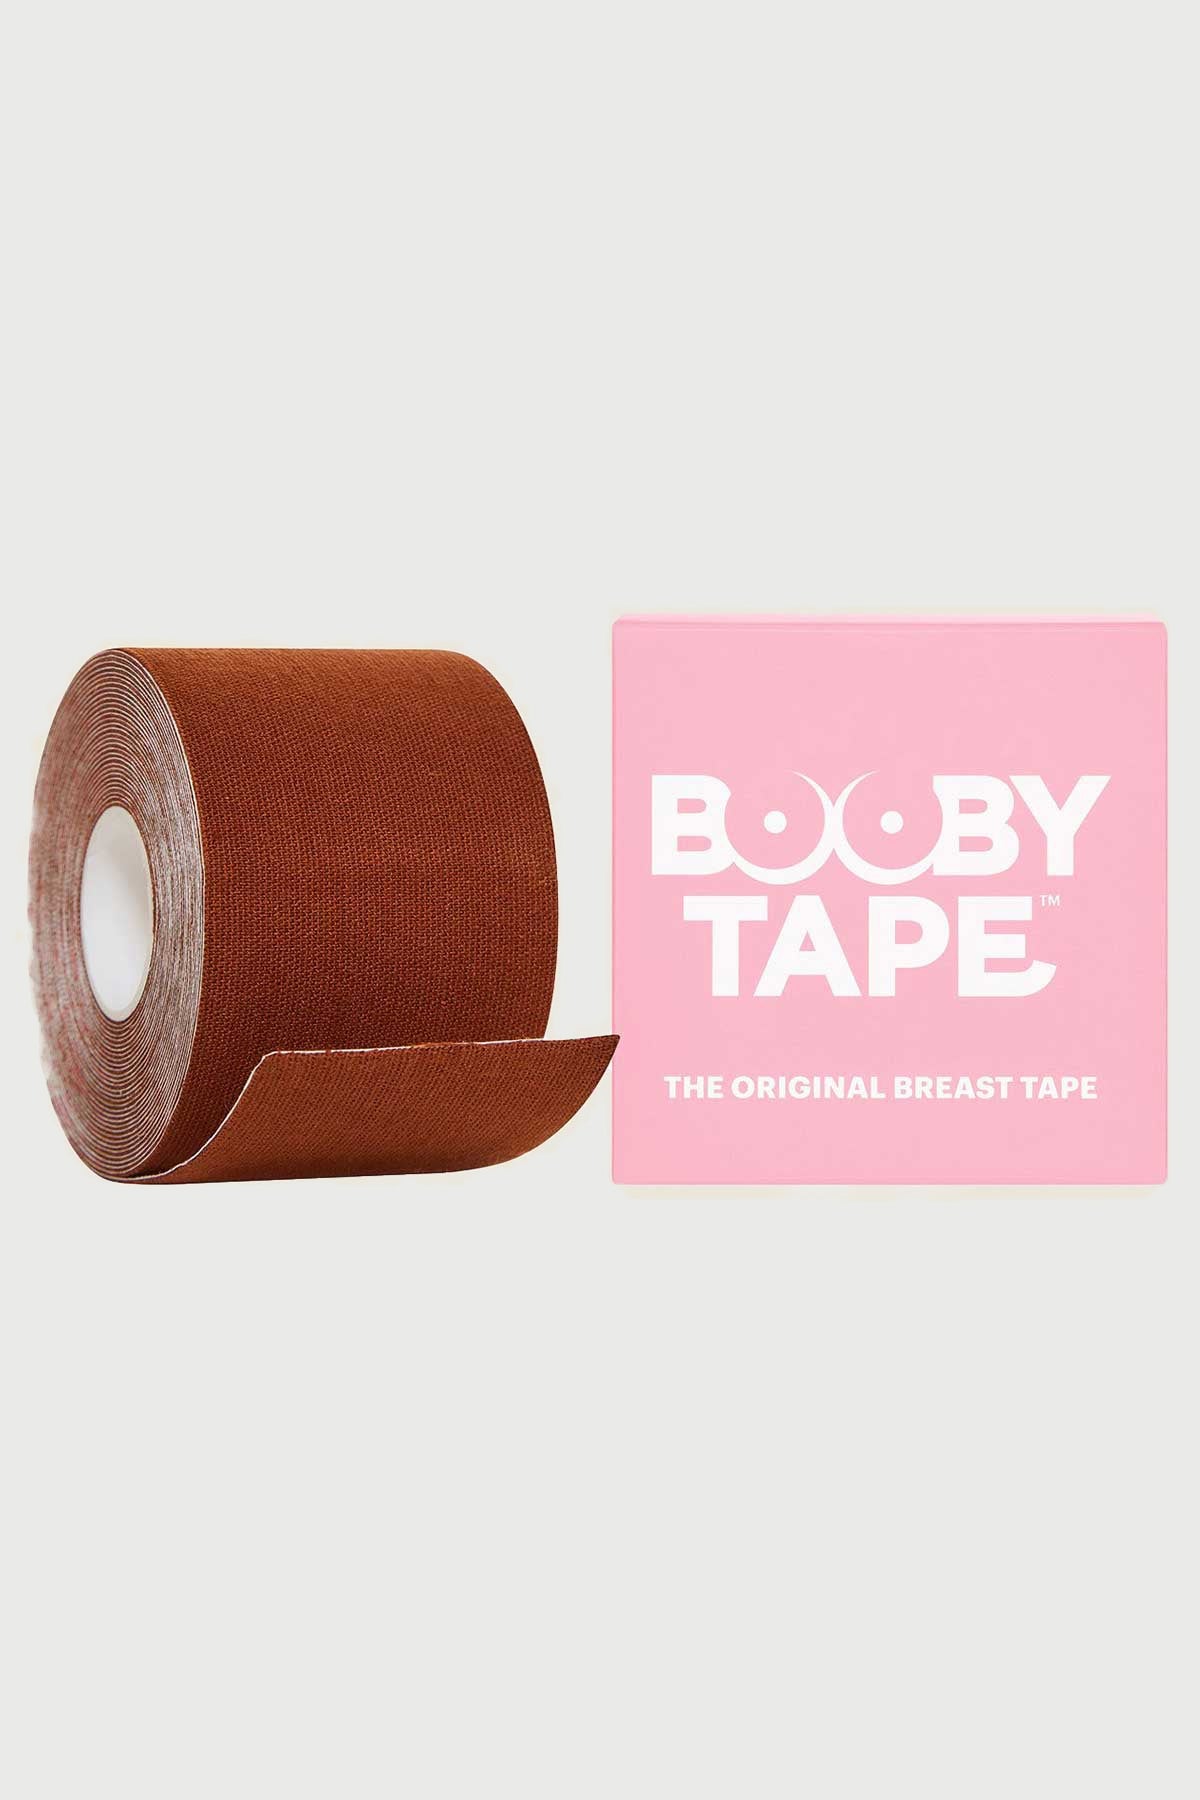 Boobytape Booby Tape Brown